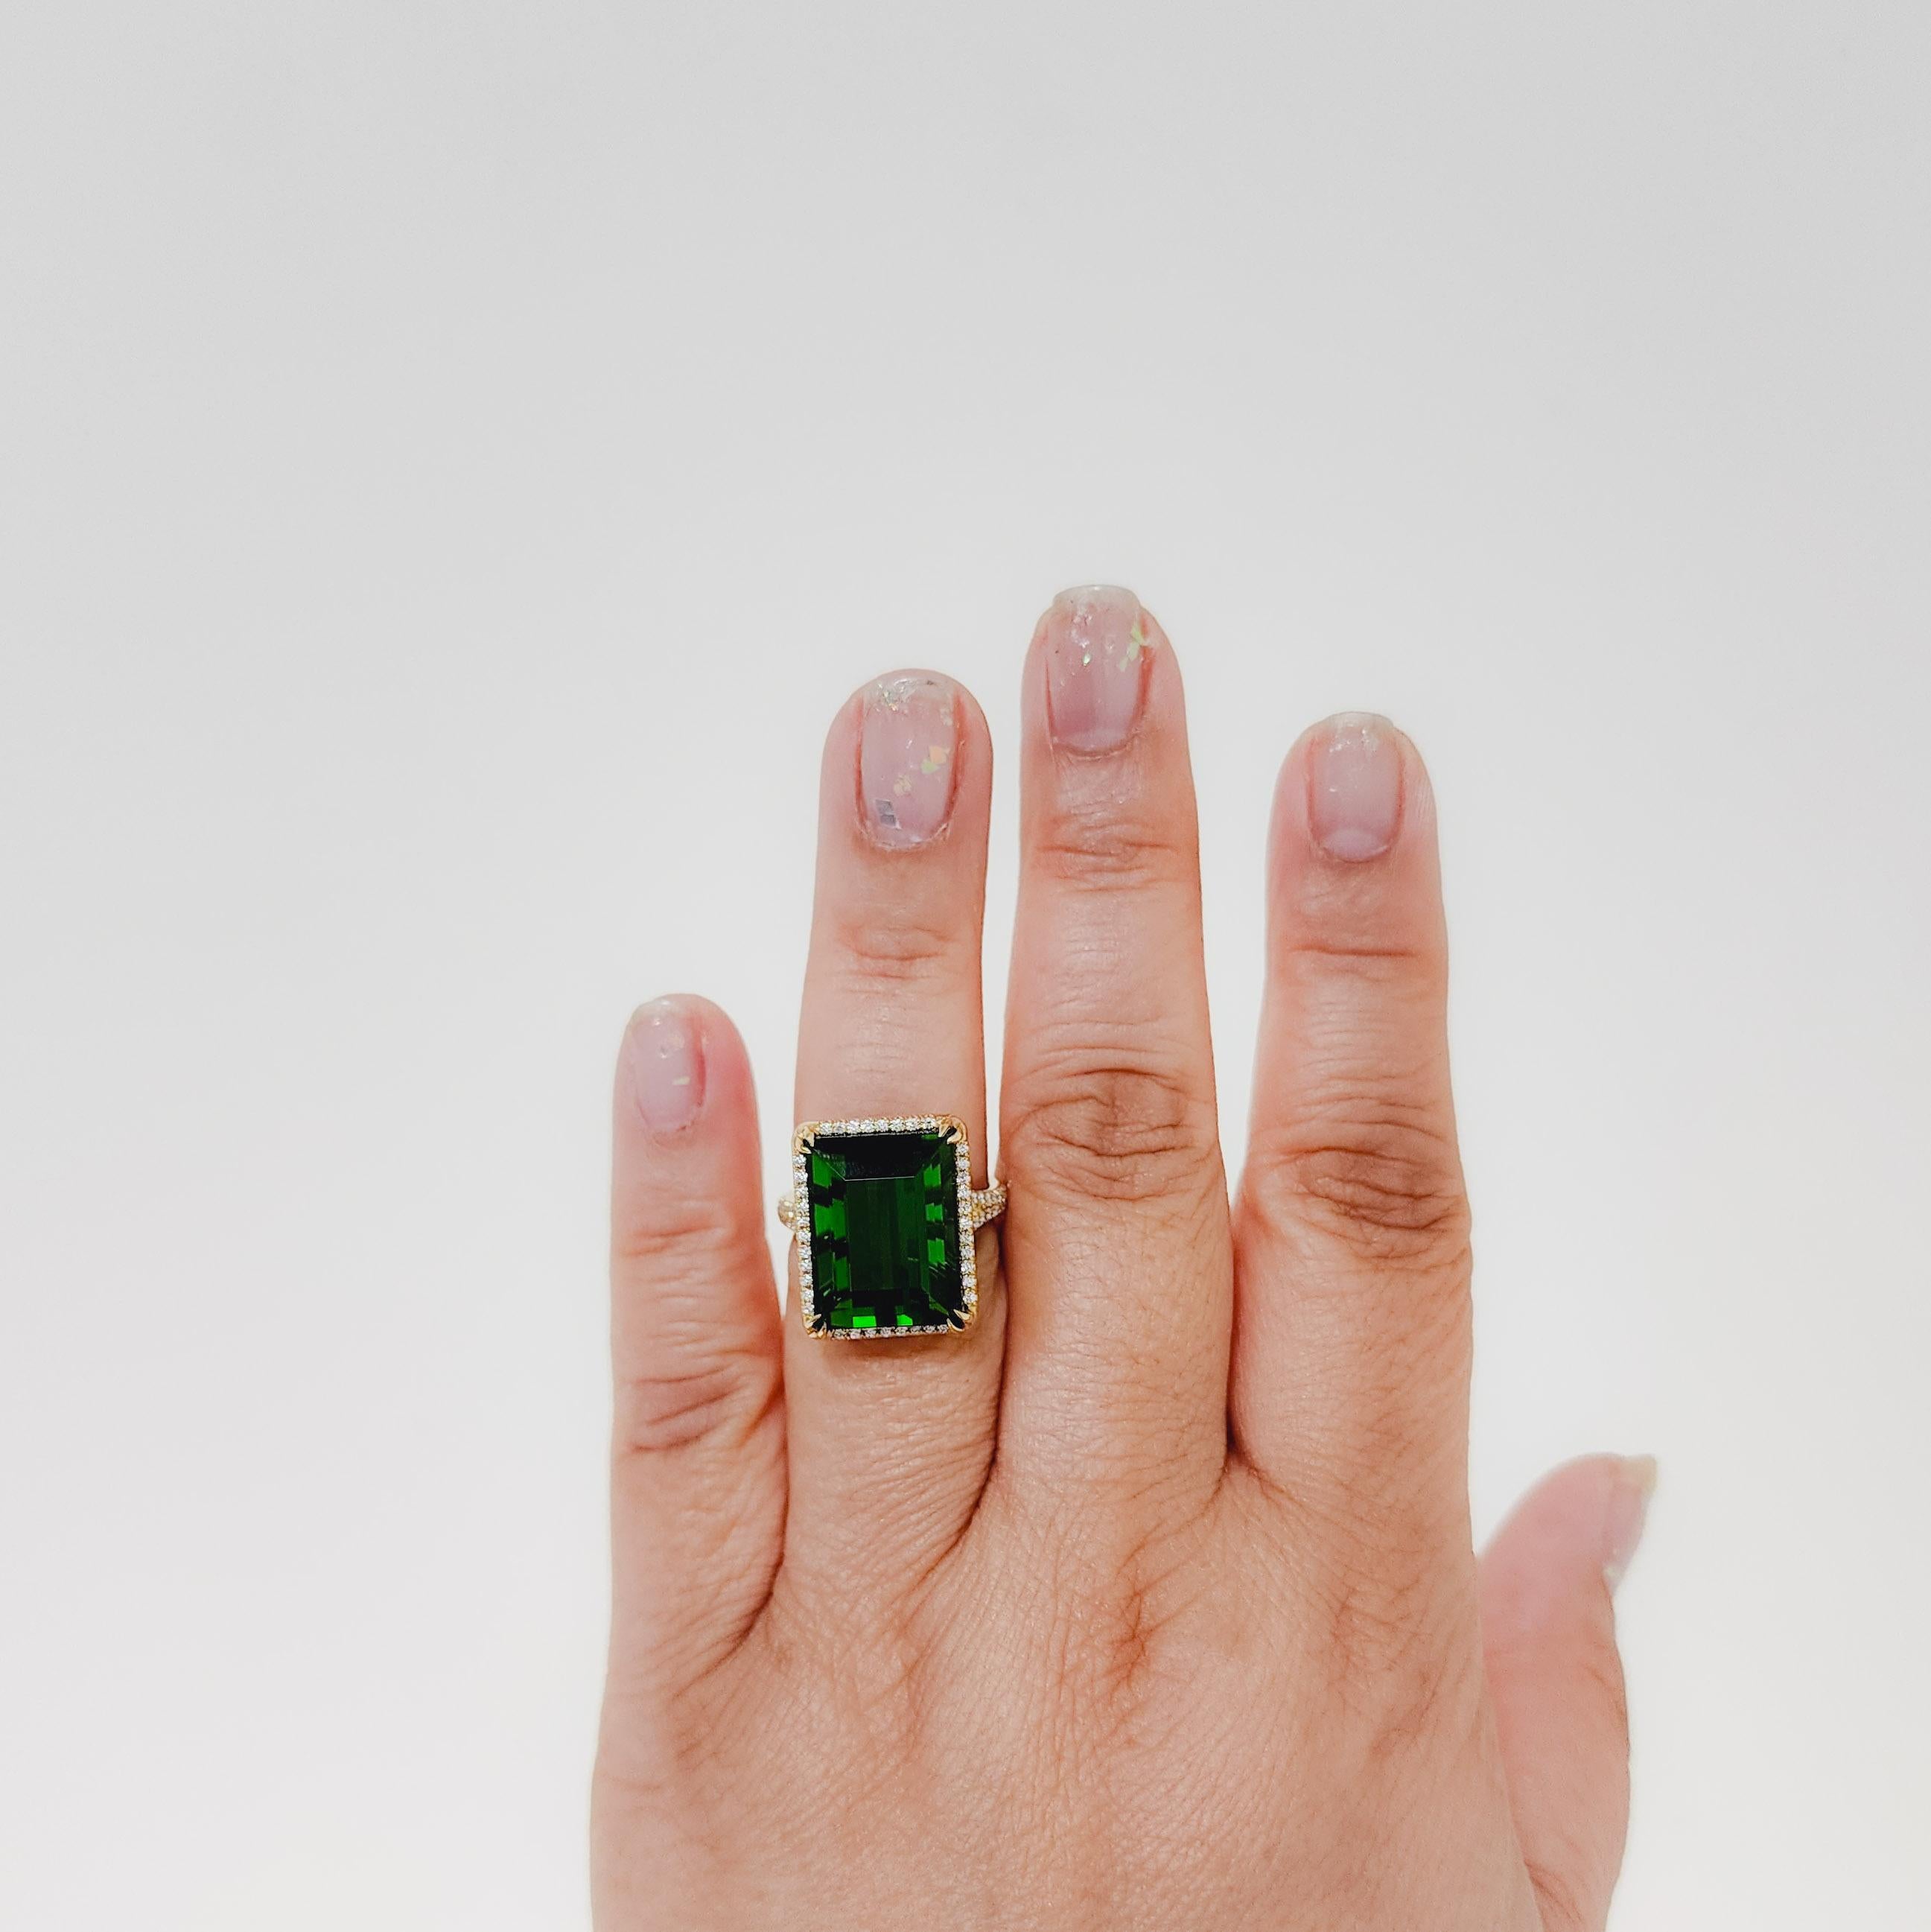 Gorgeous 19.63 ct. green tourmaline emerald cut with 0.52 ct. good quality white diamond rounds.  Handmade in 18k yellow gold. Ring size 6.5.